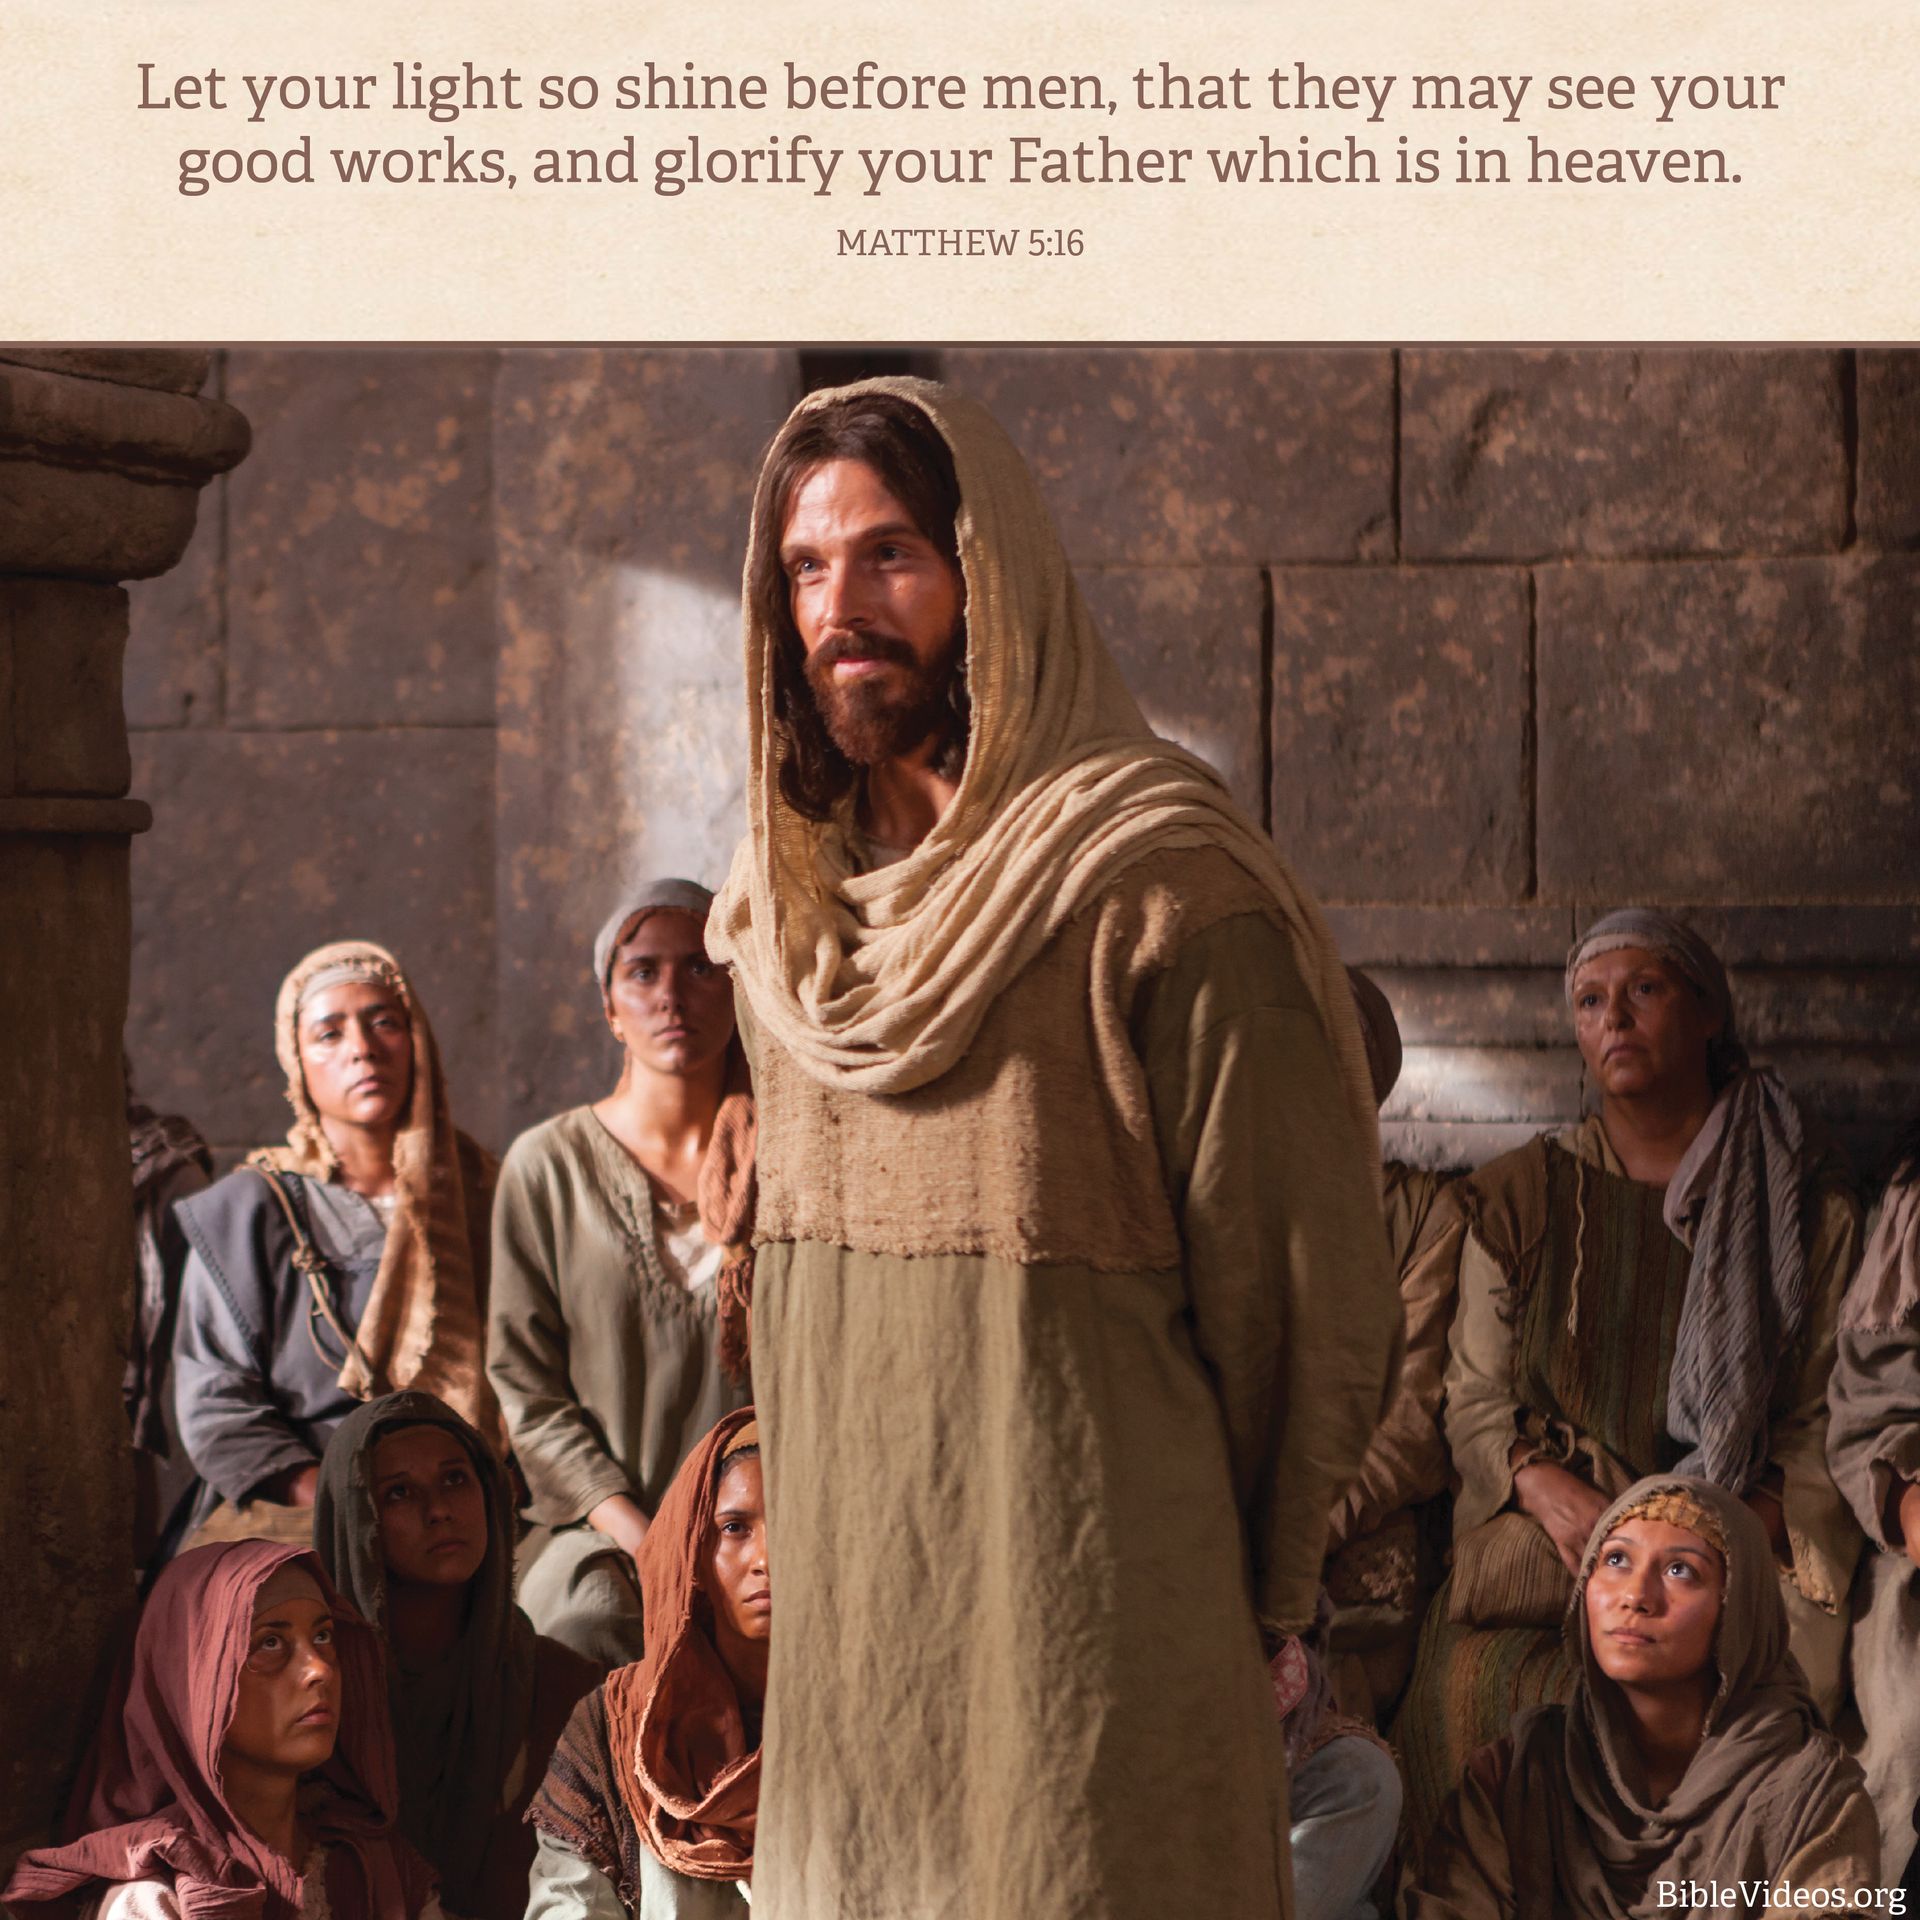 “Let your light so shine before men, that they may see your good works, and glorify your Father which is in heaven.” —Matthew 5:16